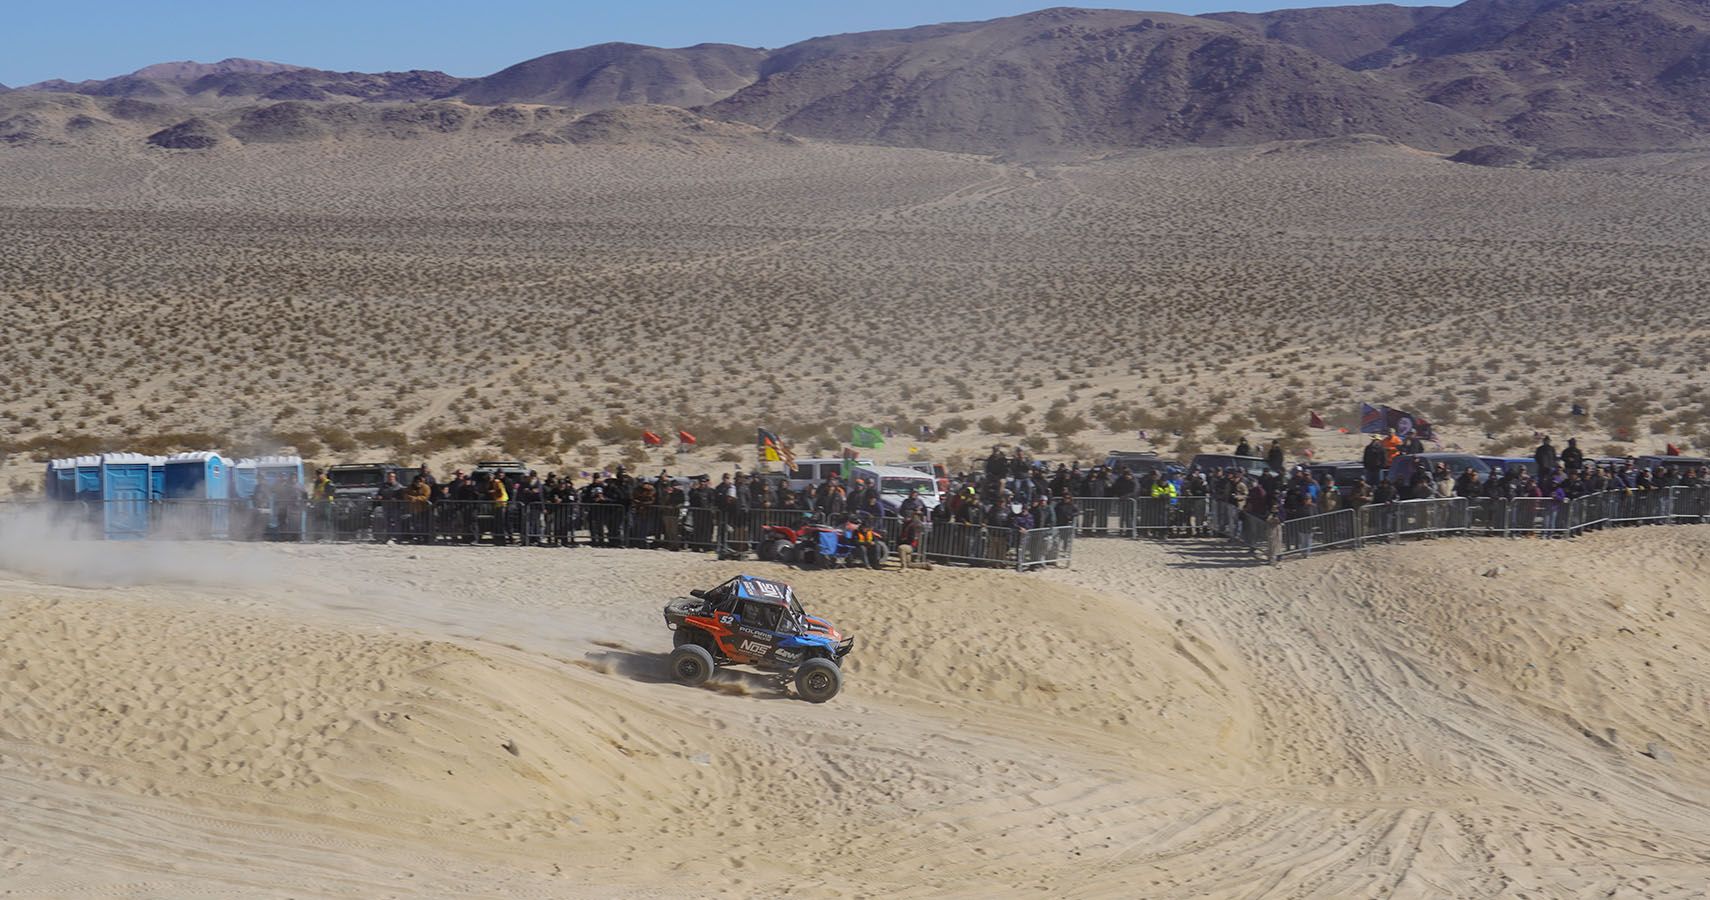 EXCLUSIVE: Chasing Hardcore UTV Racing At The King Of The Hammers